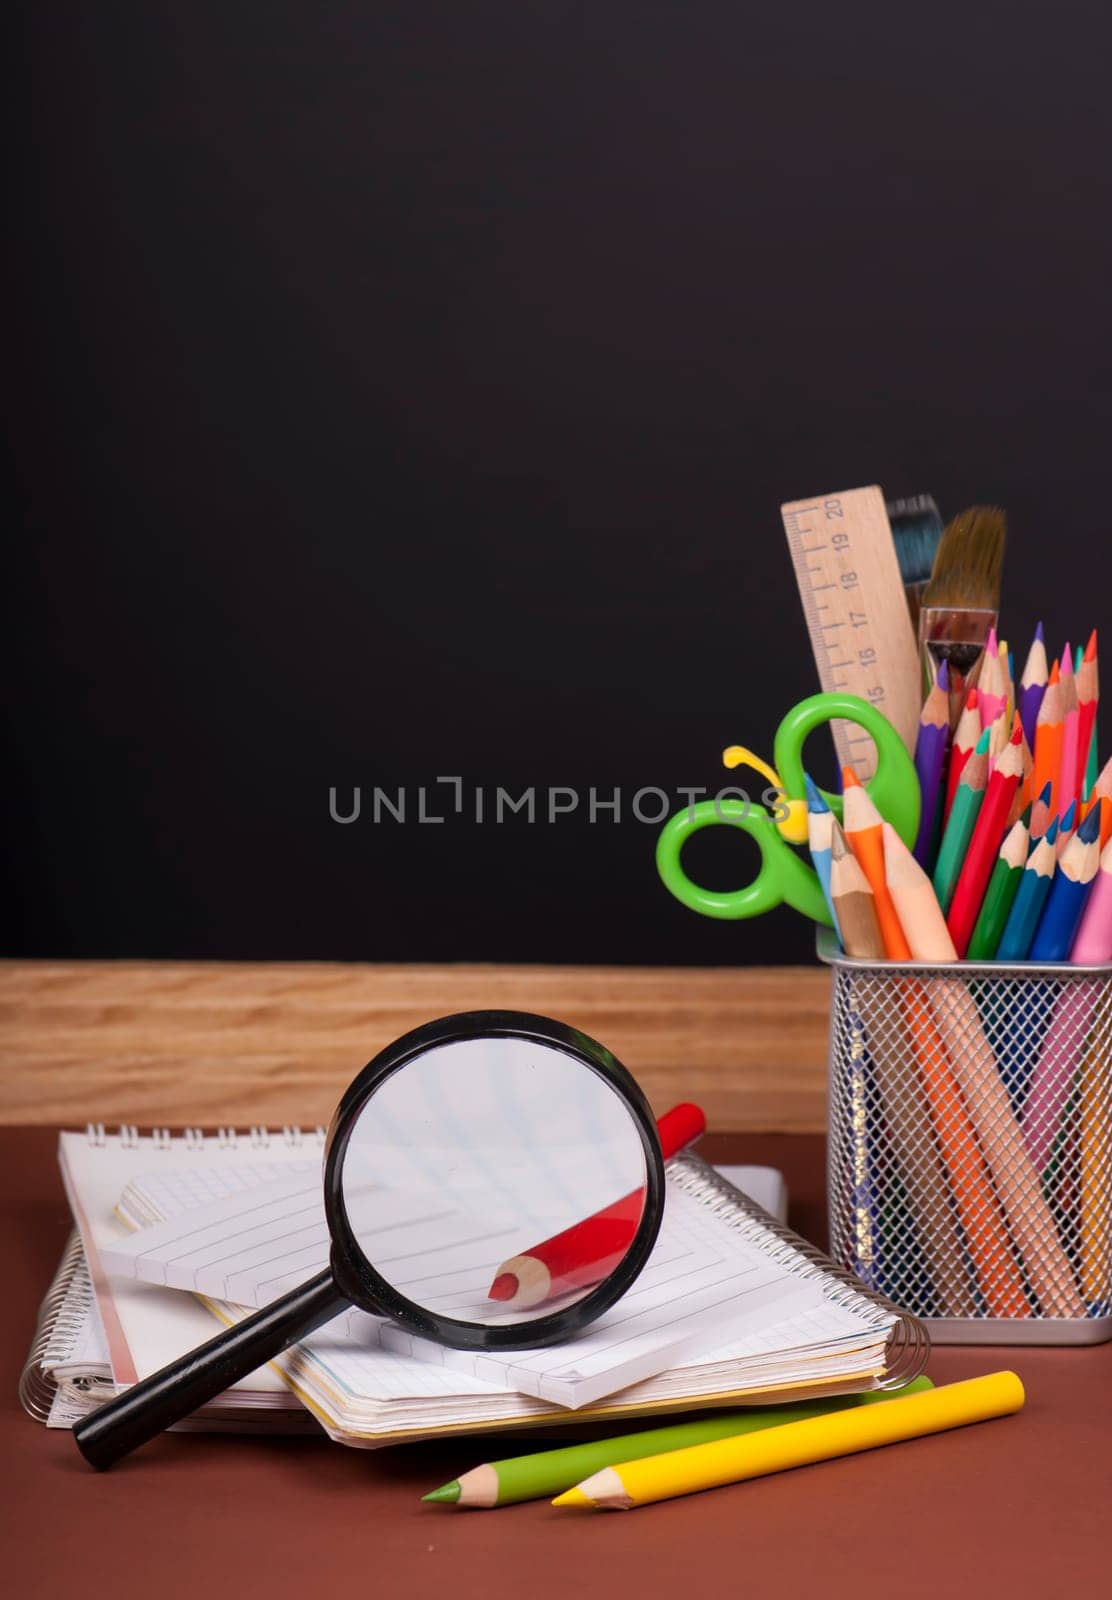 Magnifying glass, scissors, colored paper, textbooksboard, books, pencils, opened empty notebook against a dark background by aprilphoto